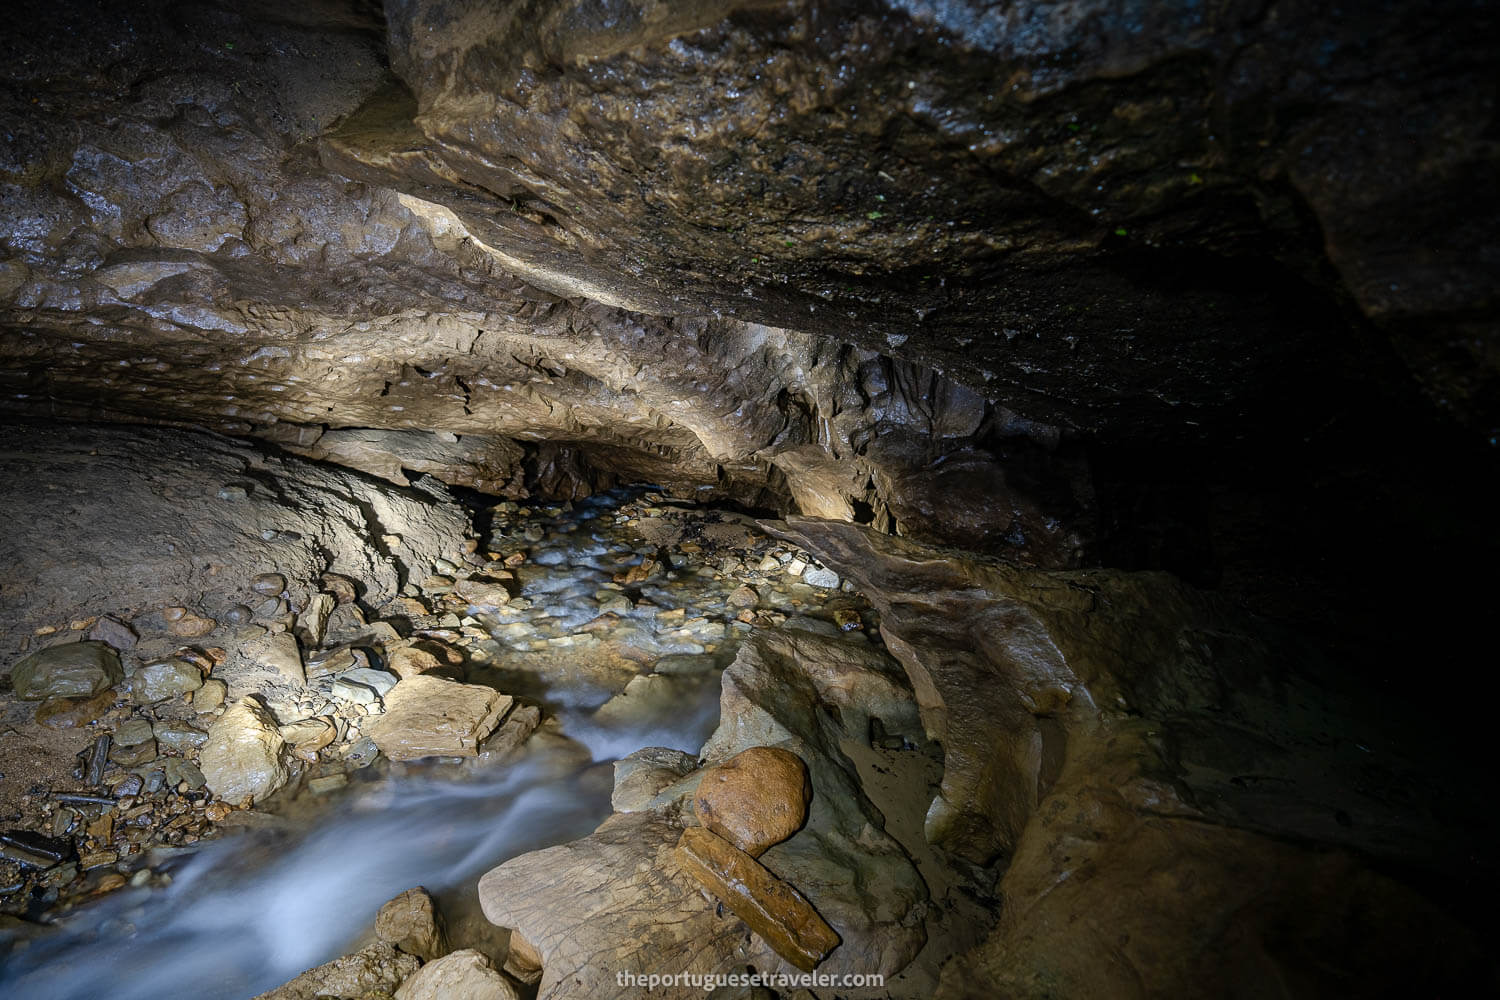 The river flowing inside the cave